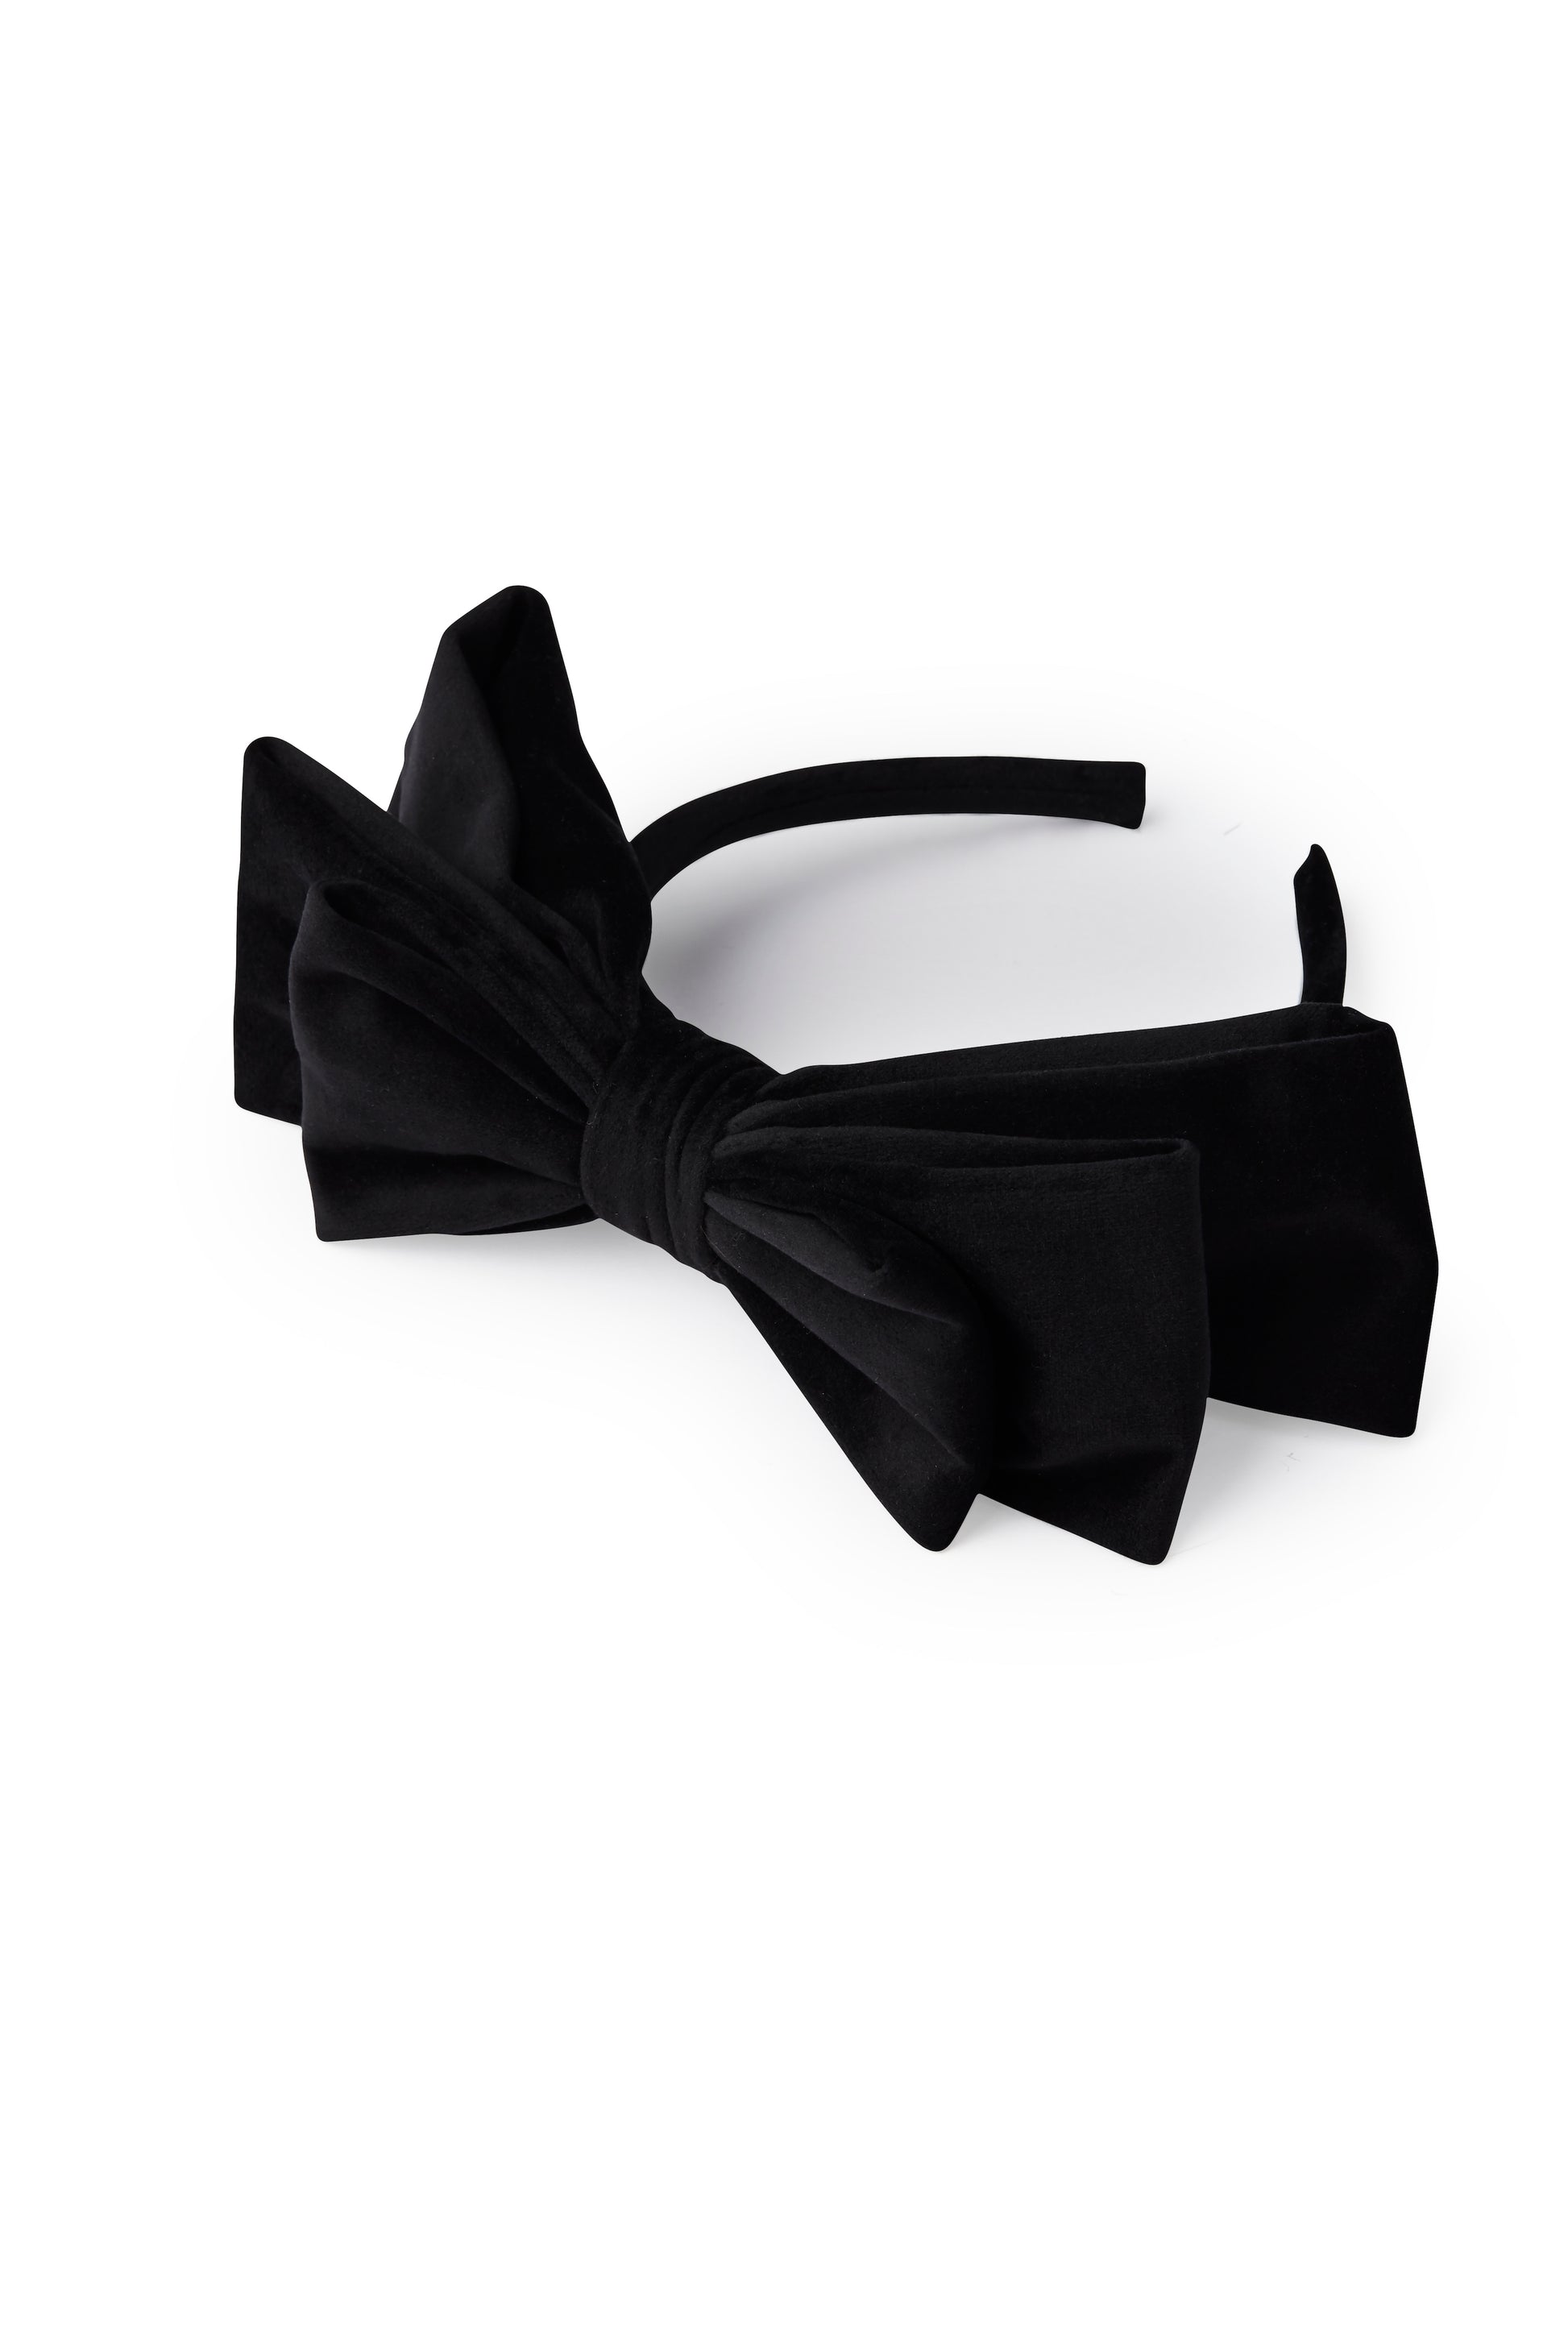 Headband with a big bow in black color